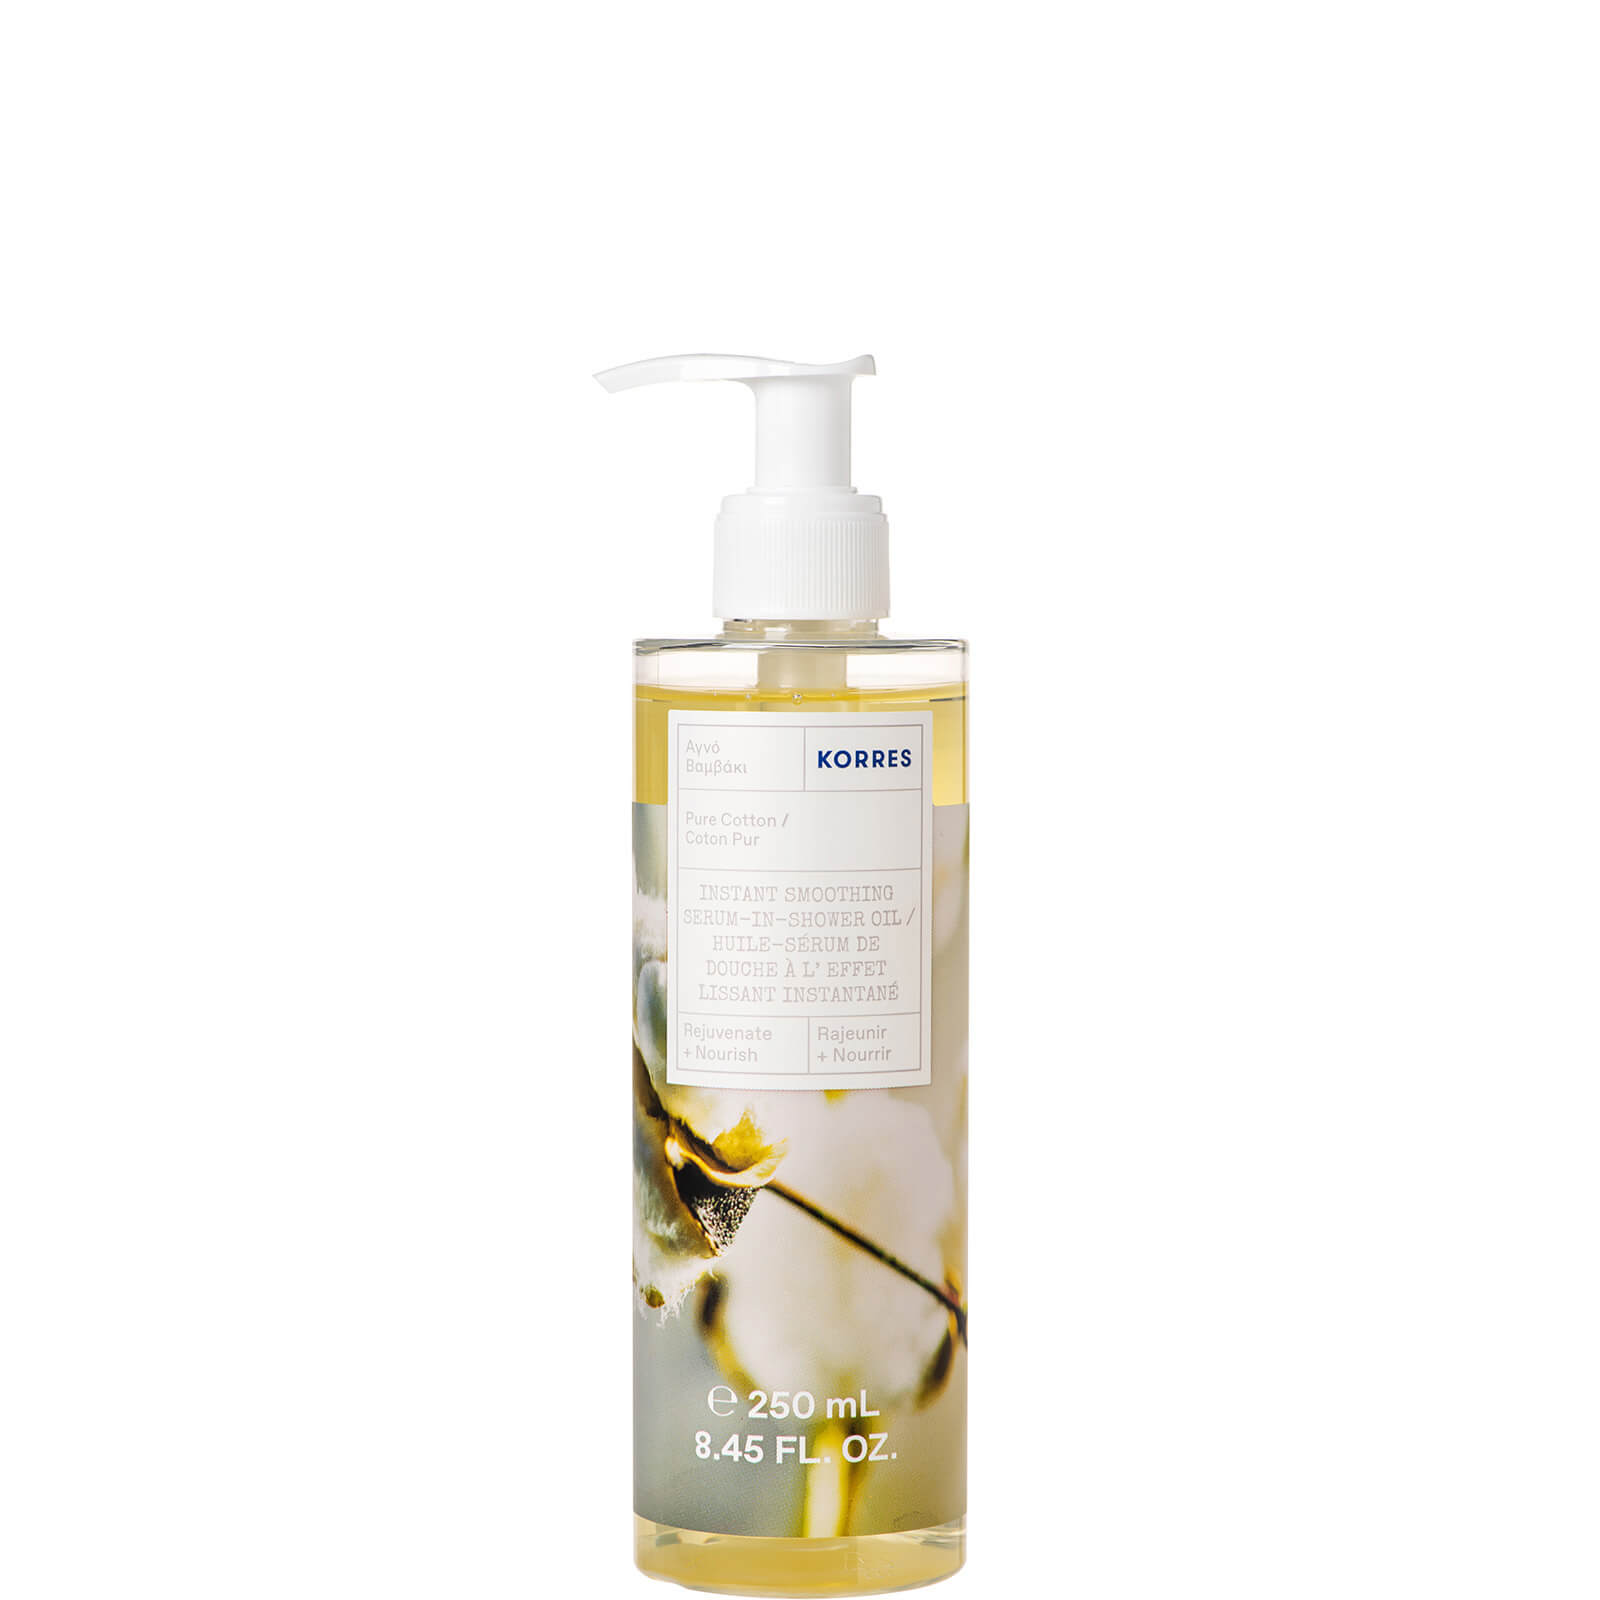 KORRES Pure Cotton Instant Smoothing Serum-In-Shower Oil 250ml